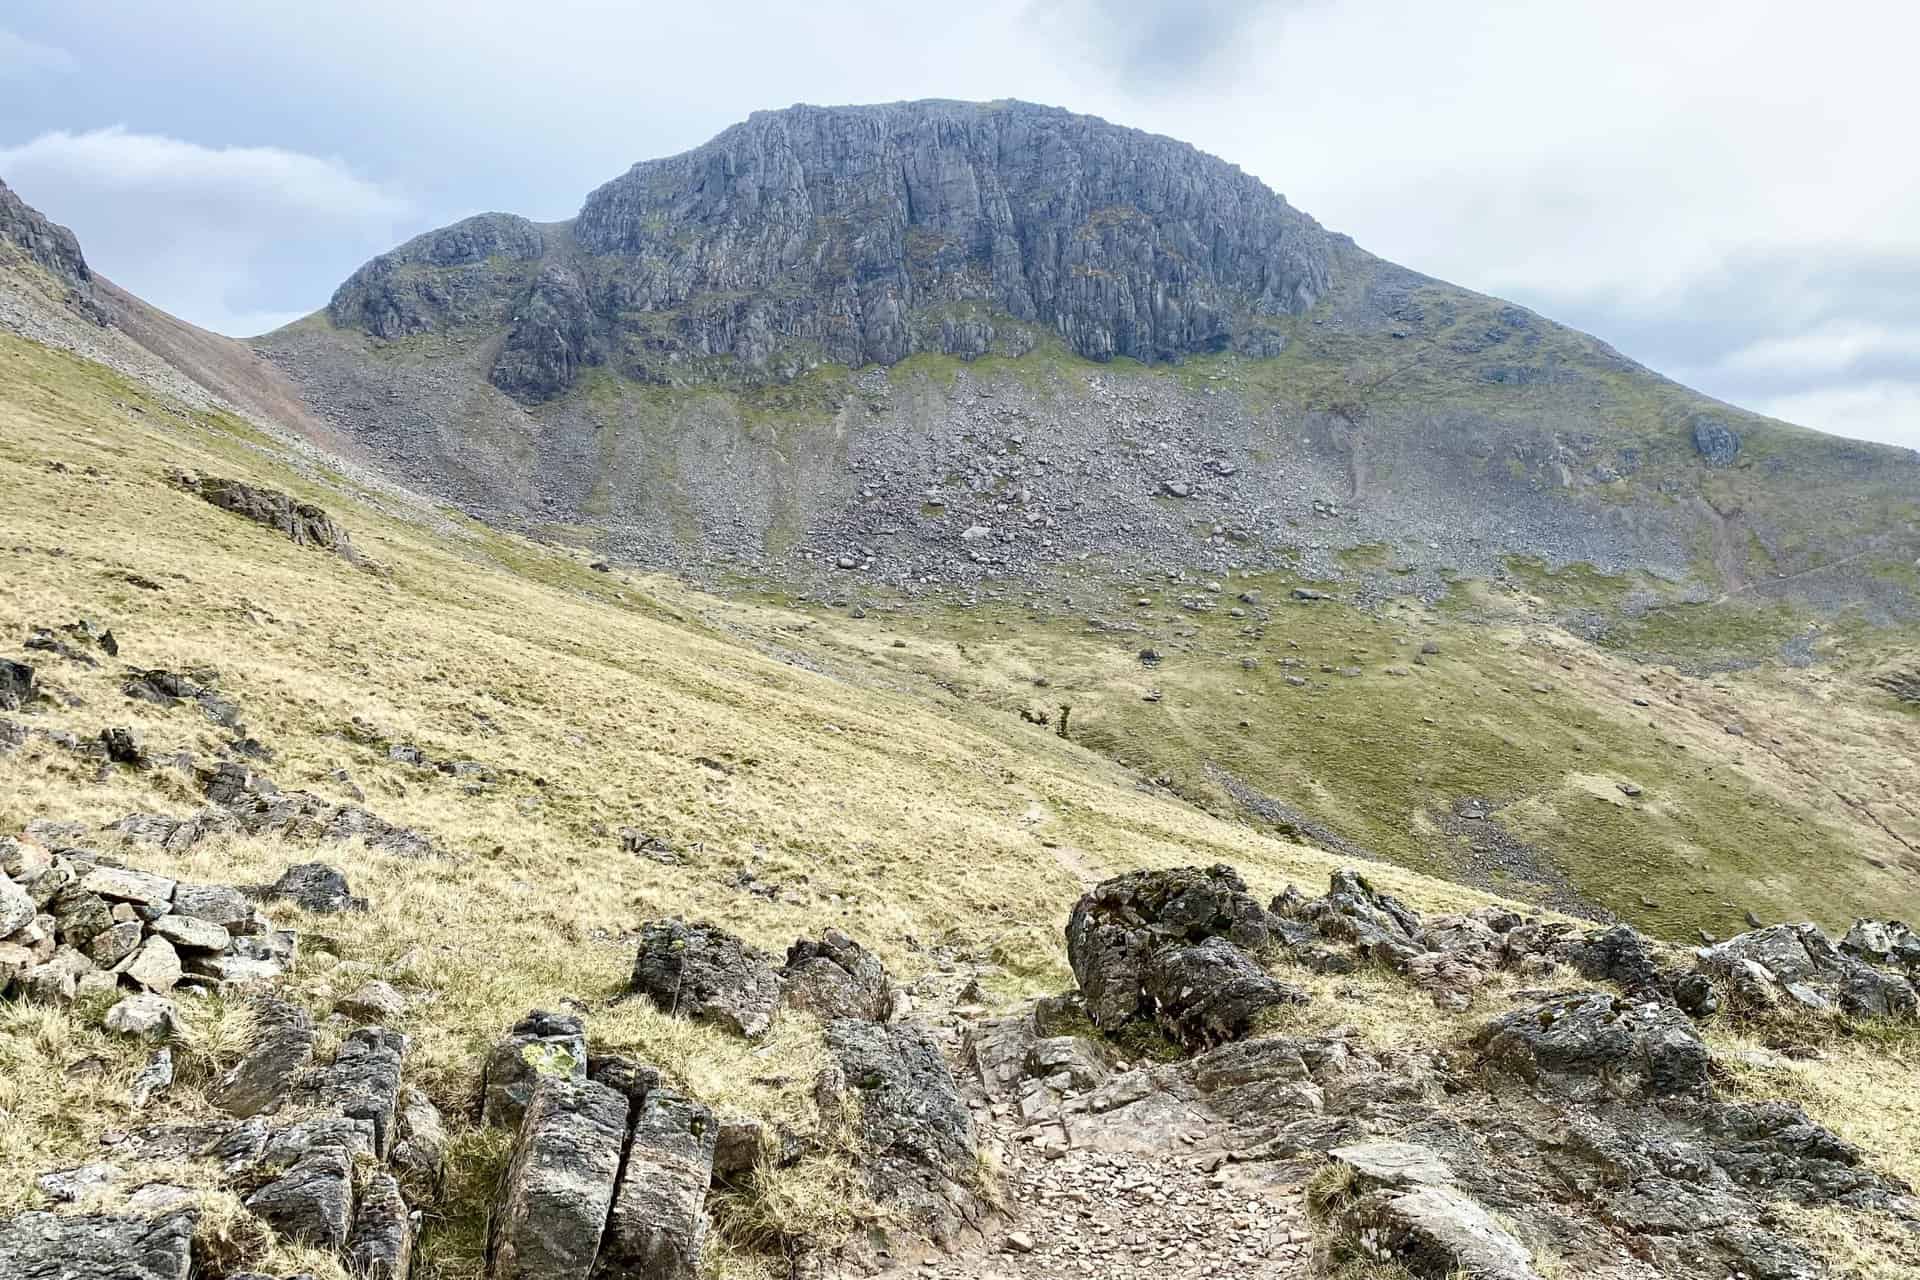 Looking back at Gable Crag from Moses' Trod.